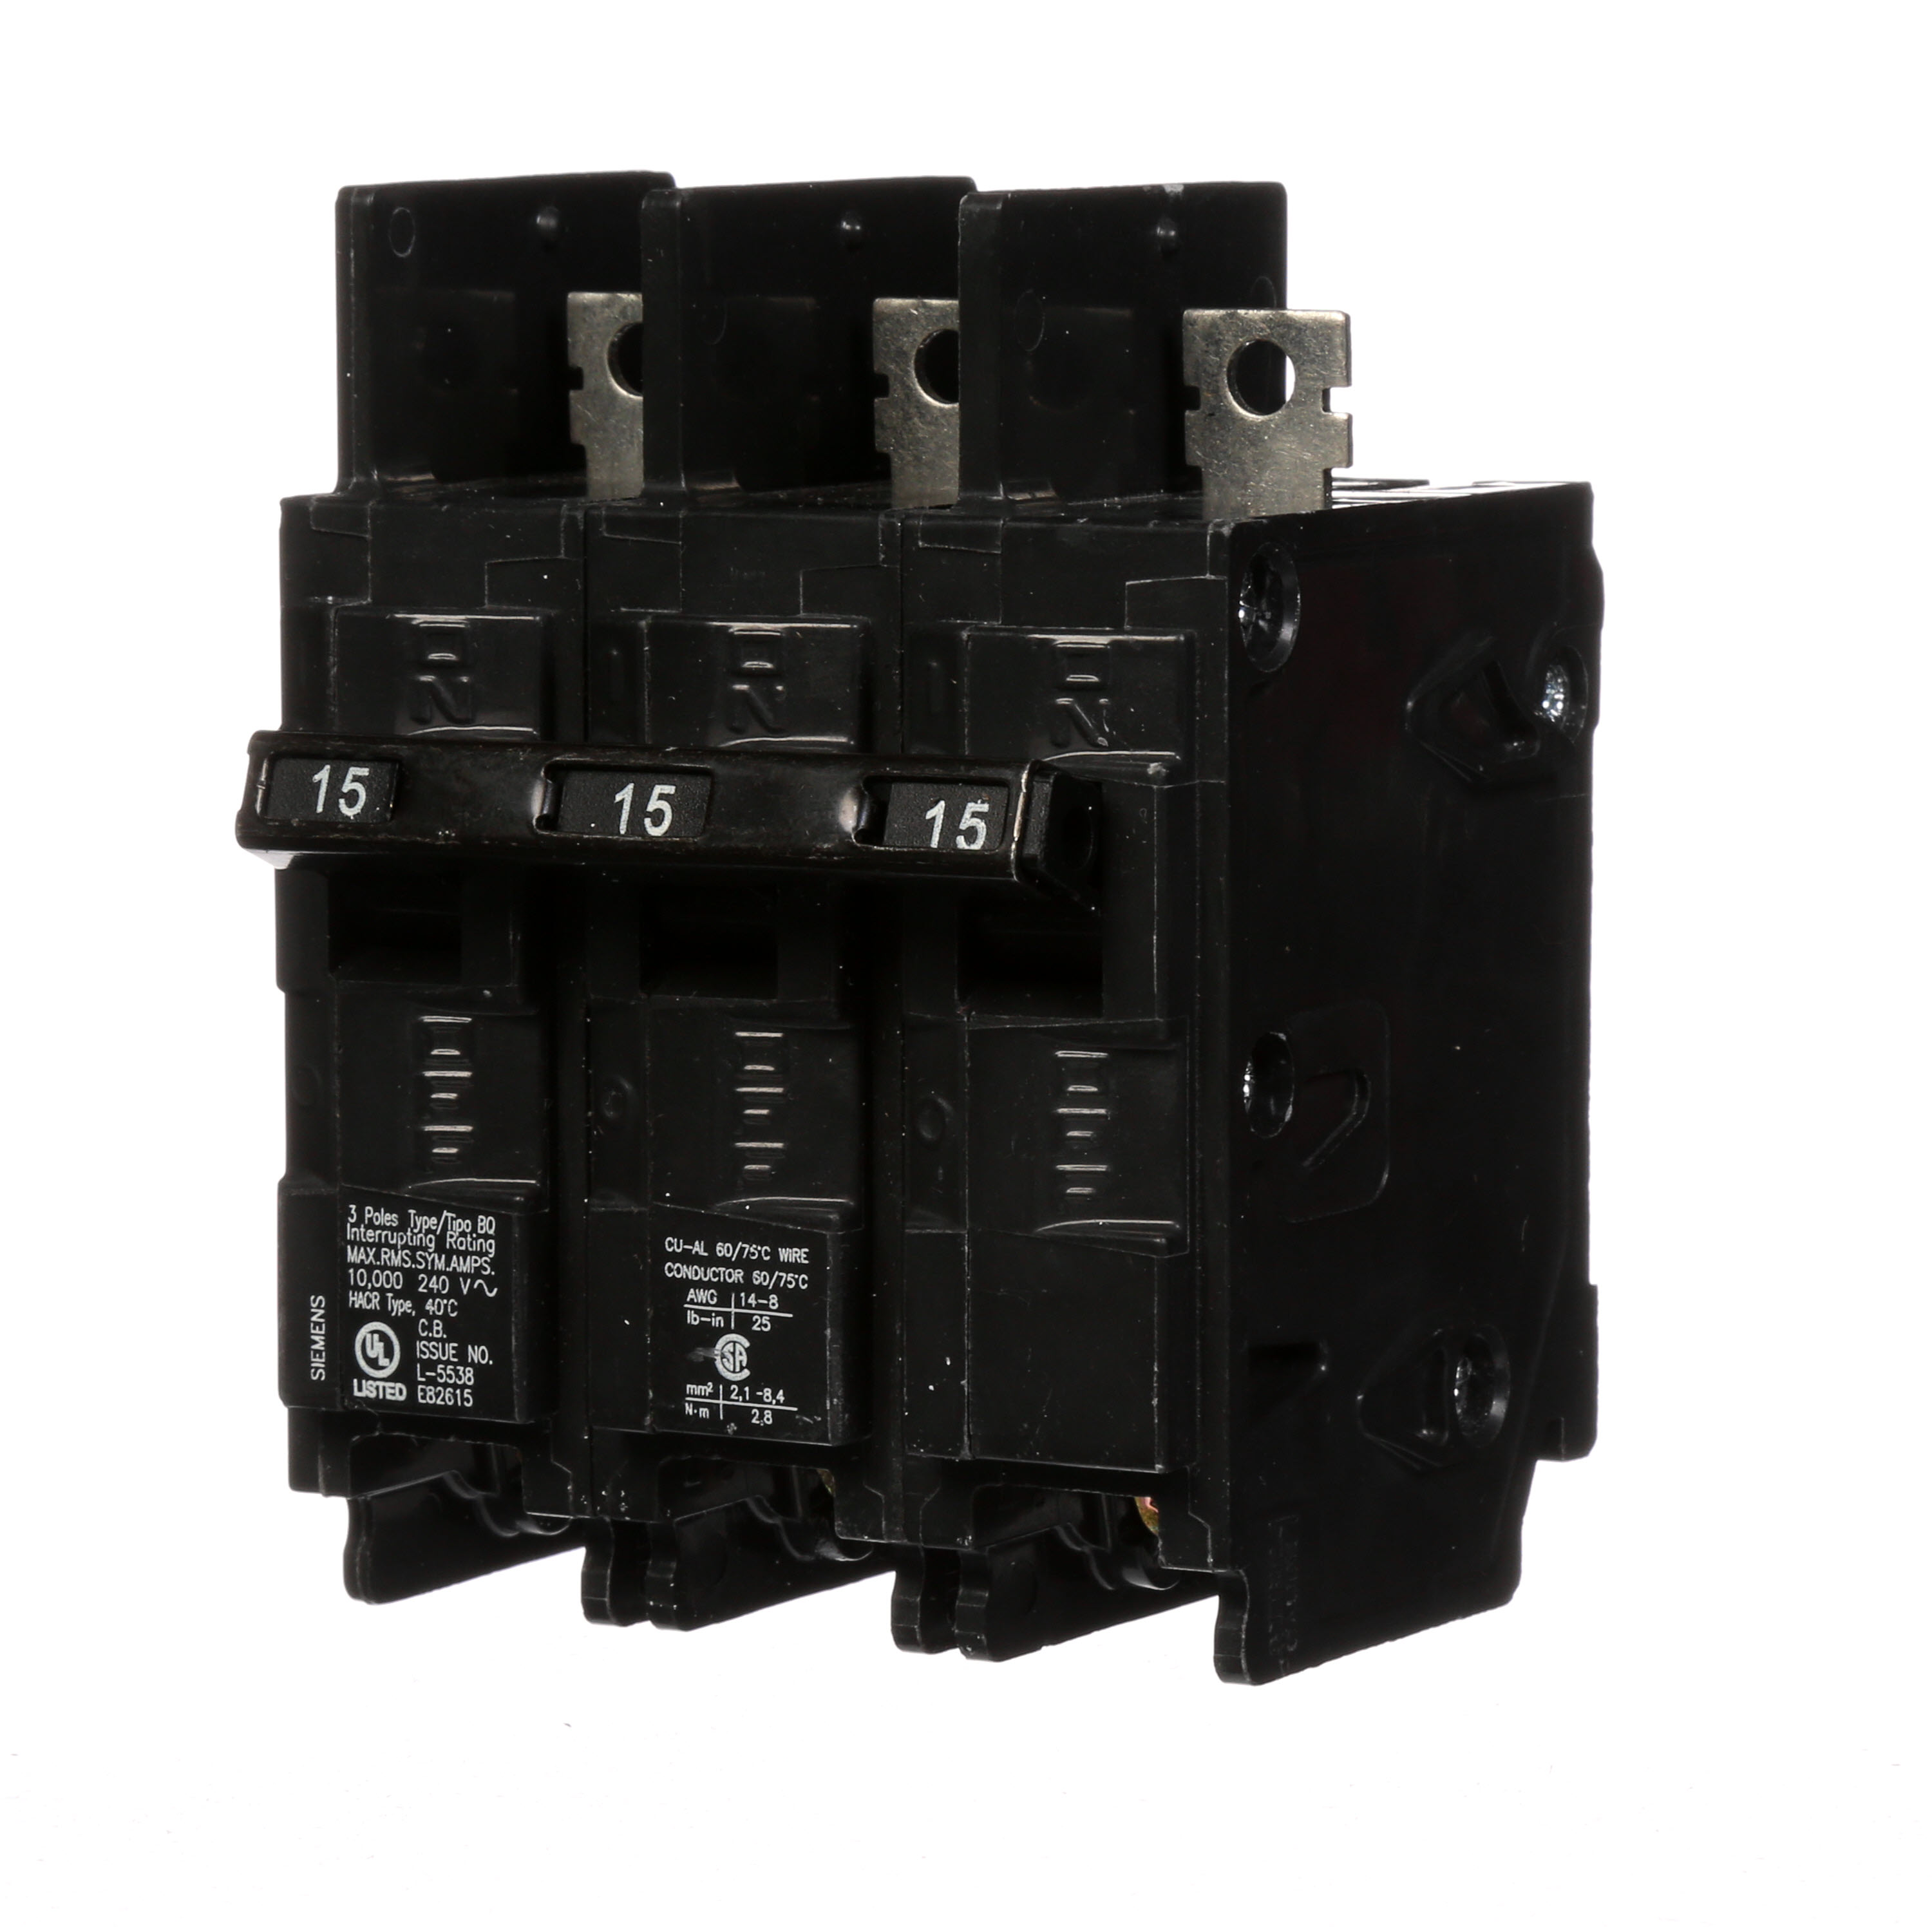 Siemens Low Voltage Molded Case Circuit Breakers General Purpose MCCBs are Circuit Protection Molded Case Circuit Breakers. 3-Pole Common-Trip circuit breaker type BQ. Rated 240V (015A) (AIR 10 kA). Special features Load side lugs are included.